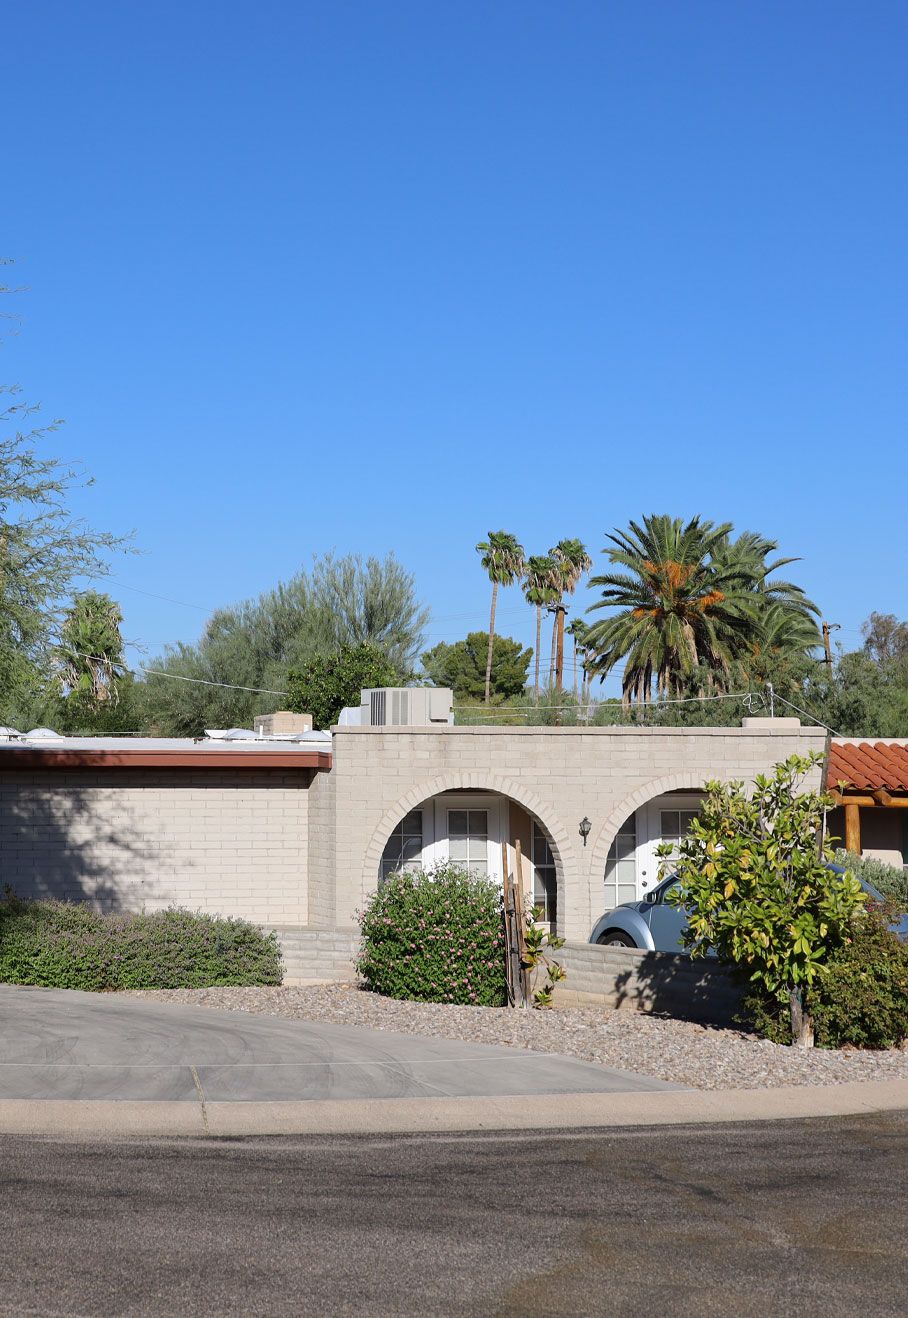 The Bradford Home Assisted Living in Tucson